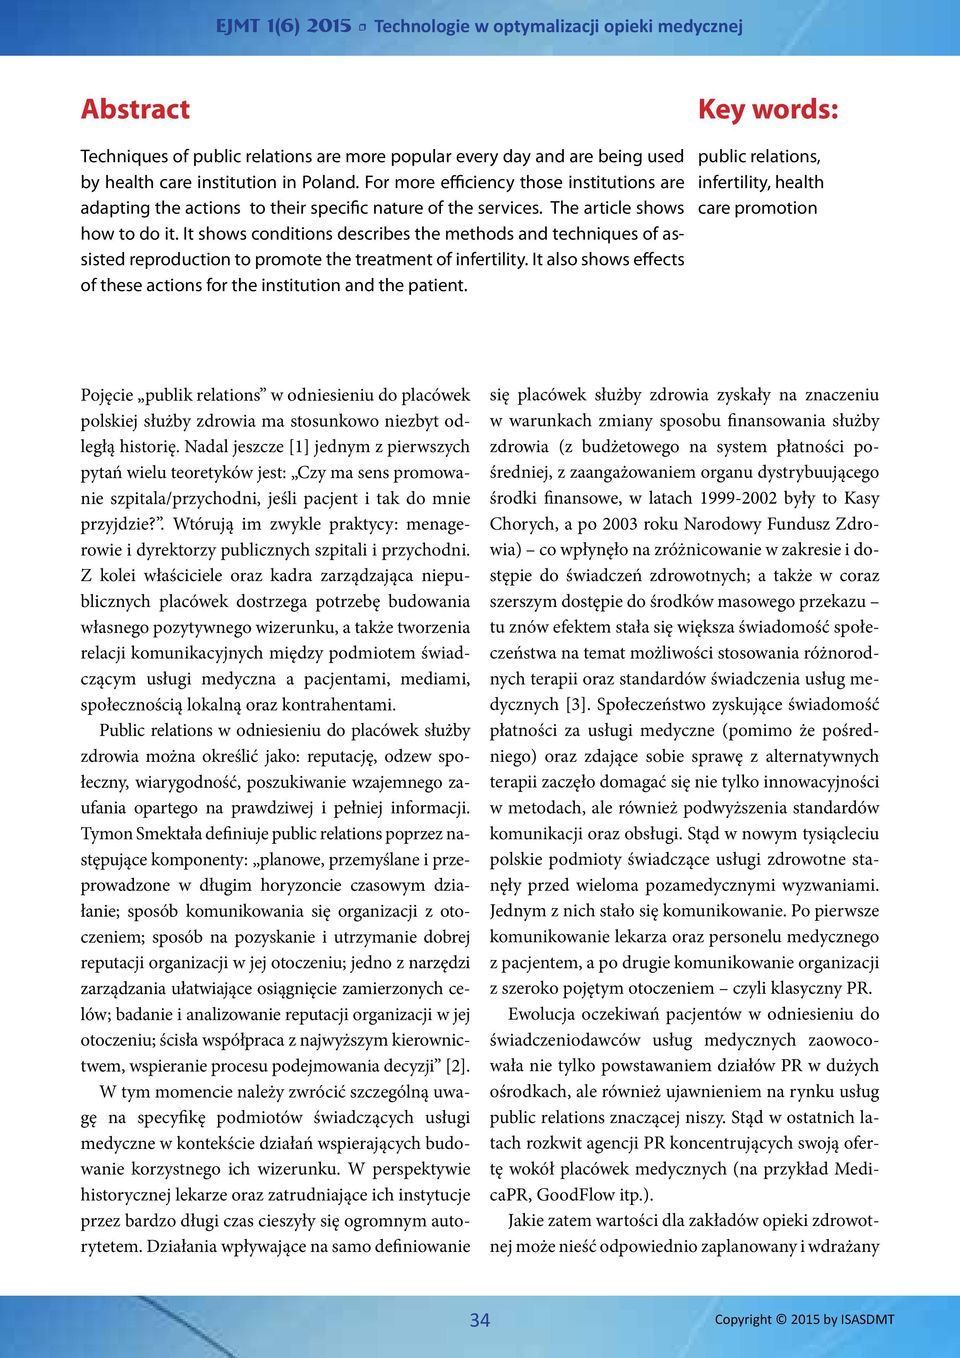 It shows conditions describes the methods and techniques of assisted reproduction to promote the treatment of infertility. It also shows effects of these actions for the institution and the patient.